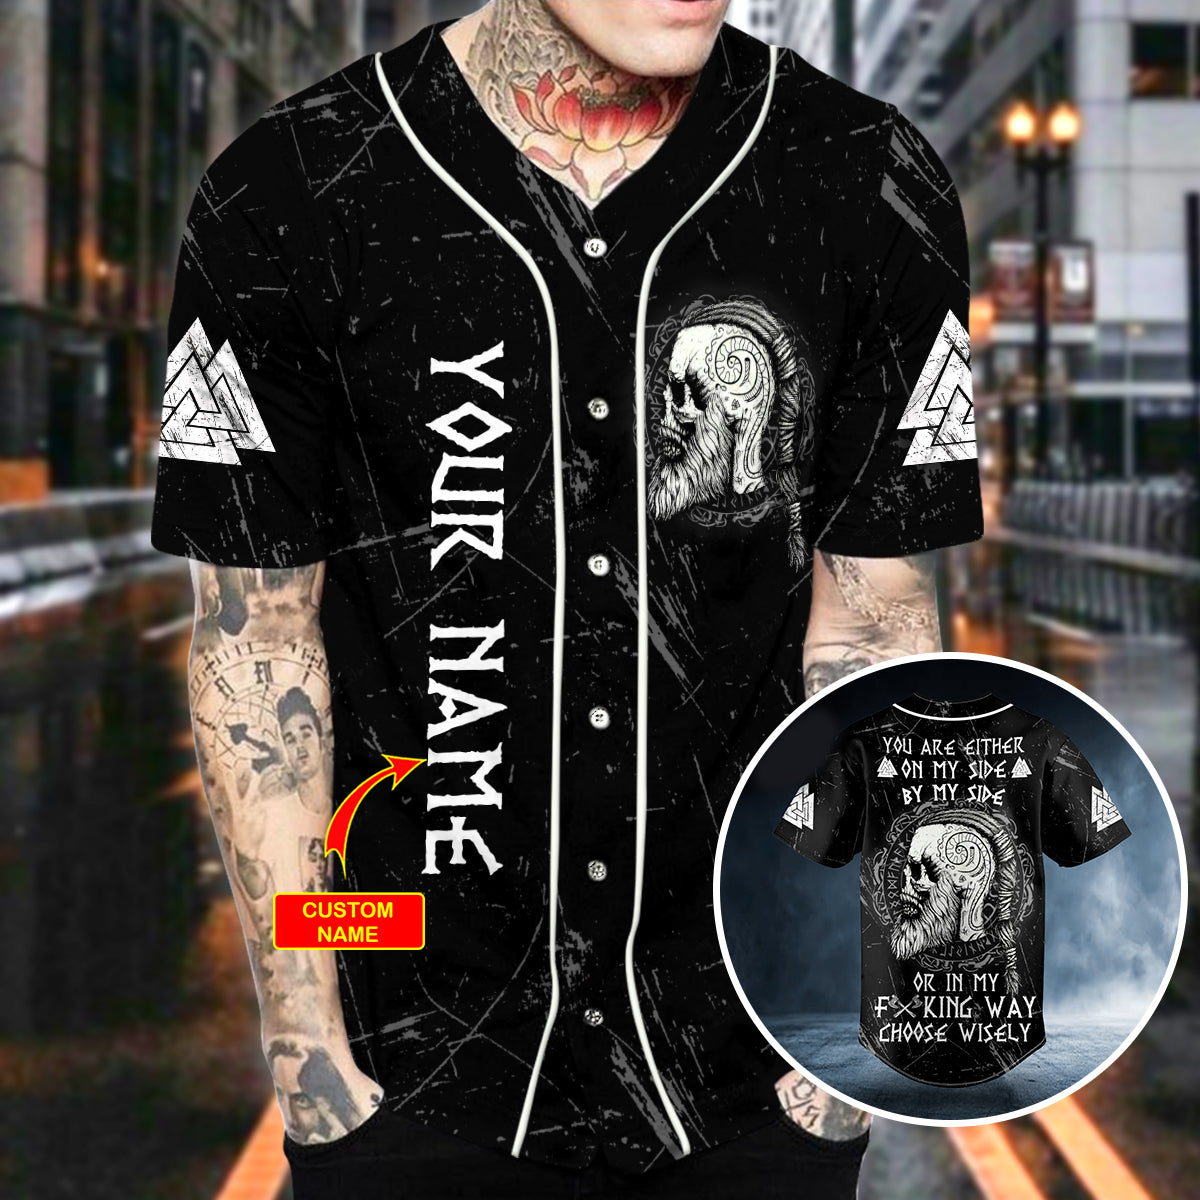 you are either on my side by my side viking skull custom baseball jersey bsj 620 hlc5e